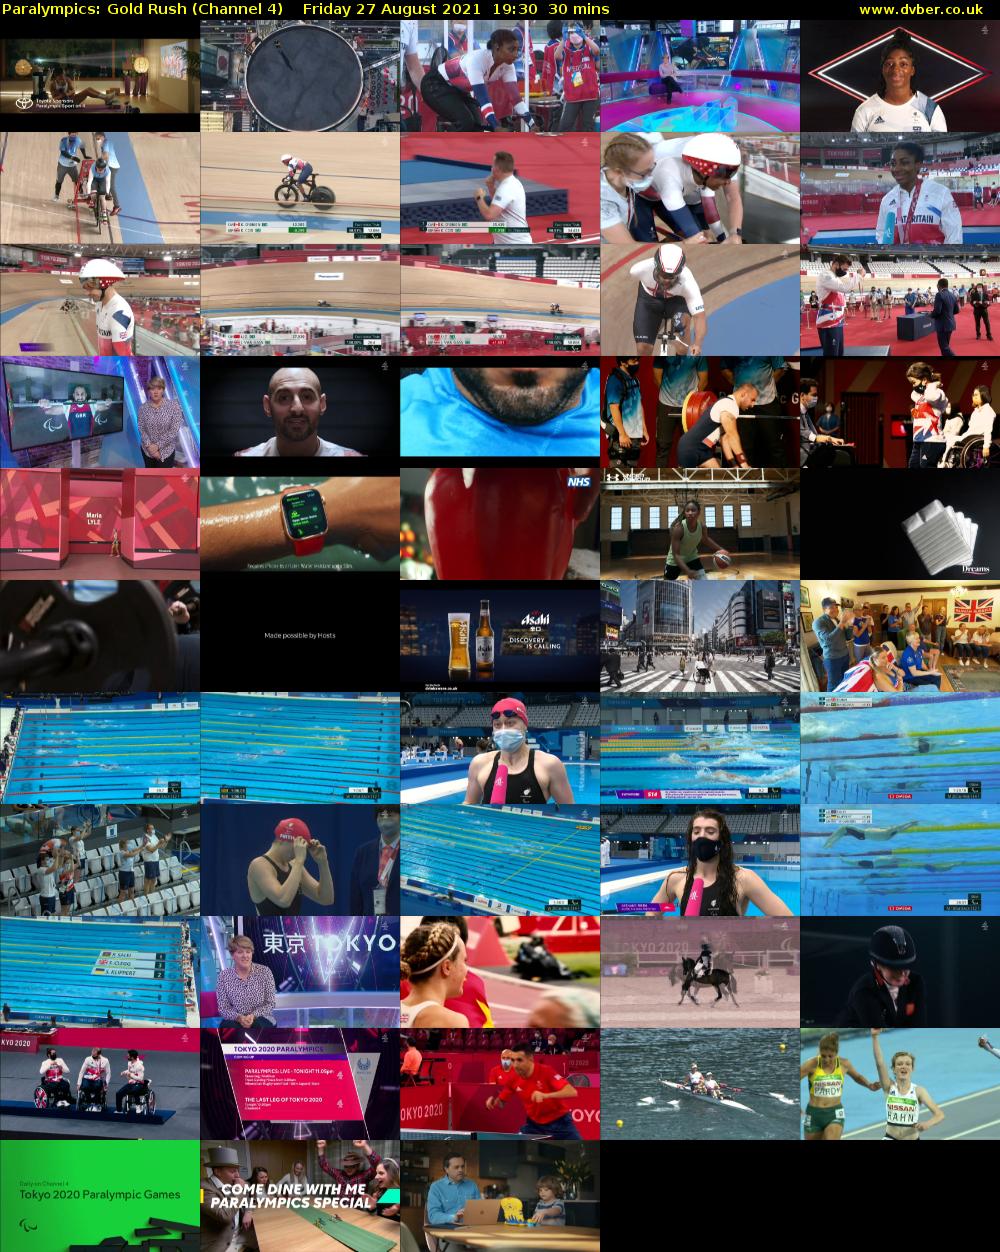 Paralympics: Gold Rush (Channel 4) Friday 27 August 2021 19:30 - 20:00